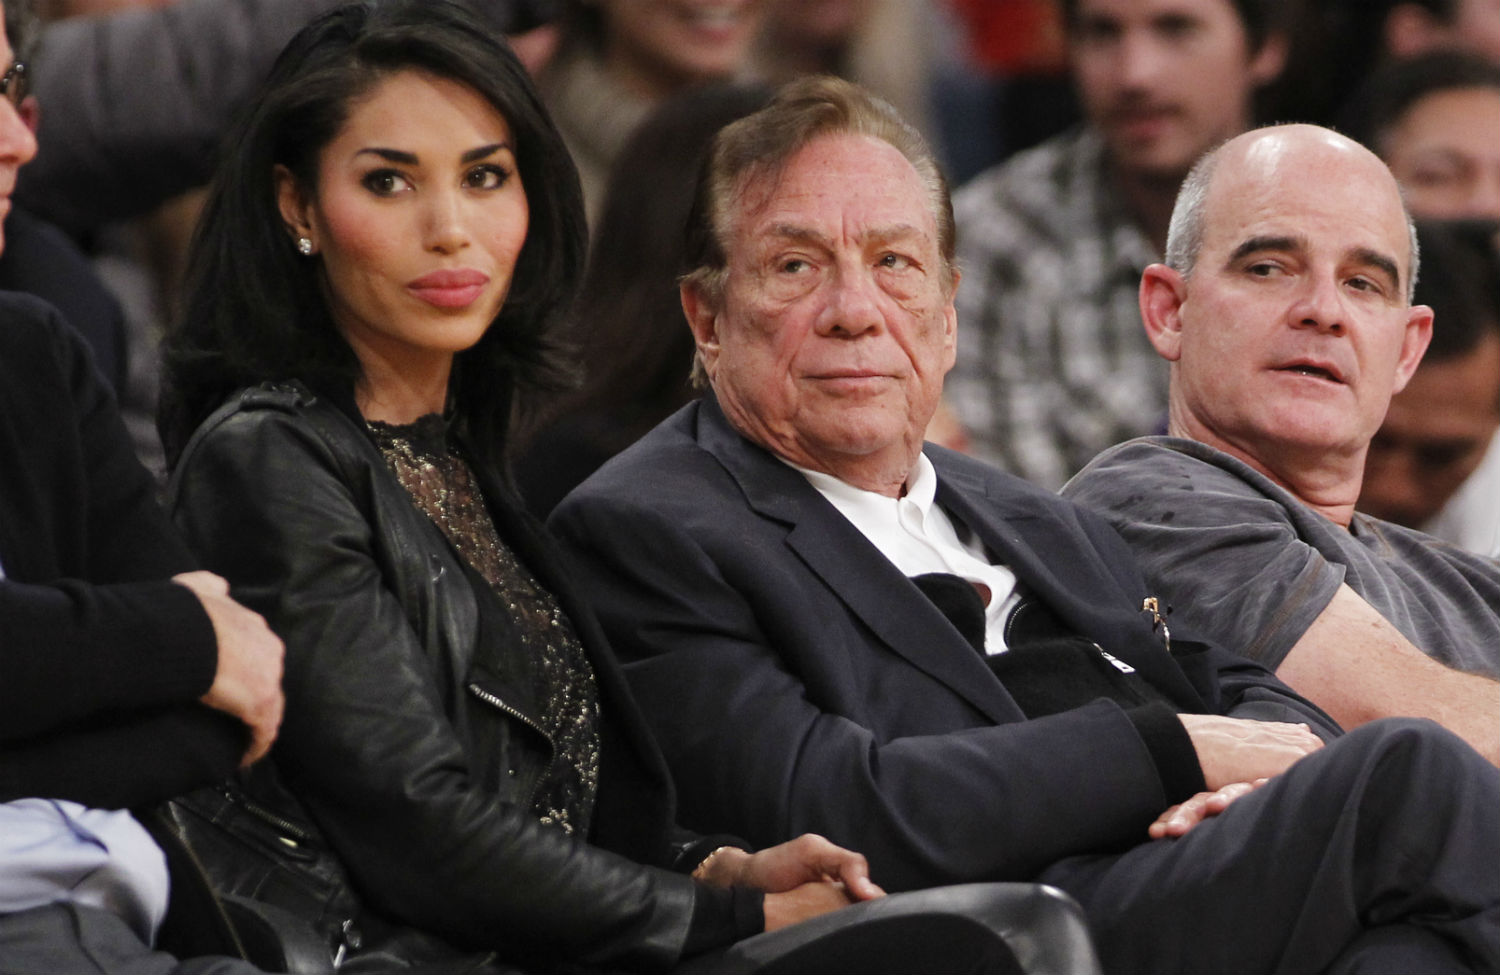 What Helped Bring Donald Sterling Down? A Threatened Strike Against Racism